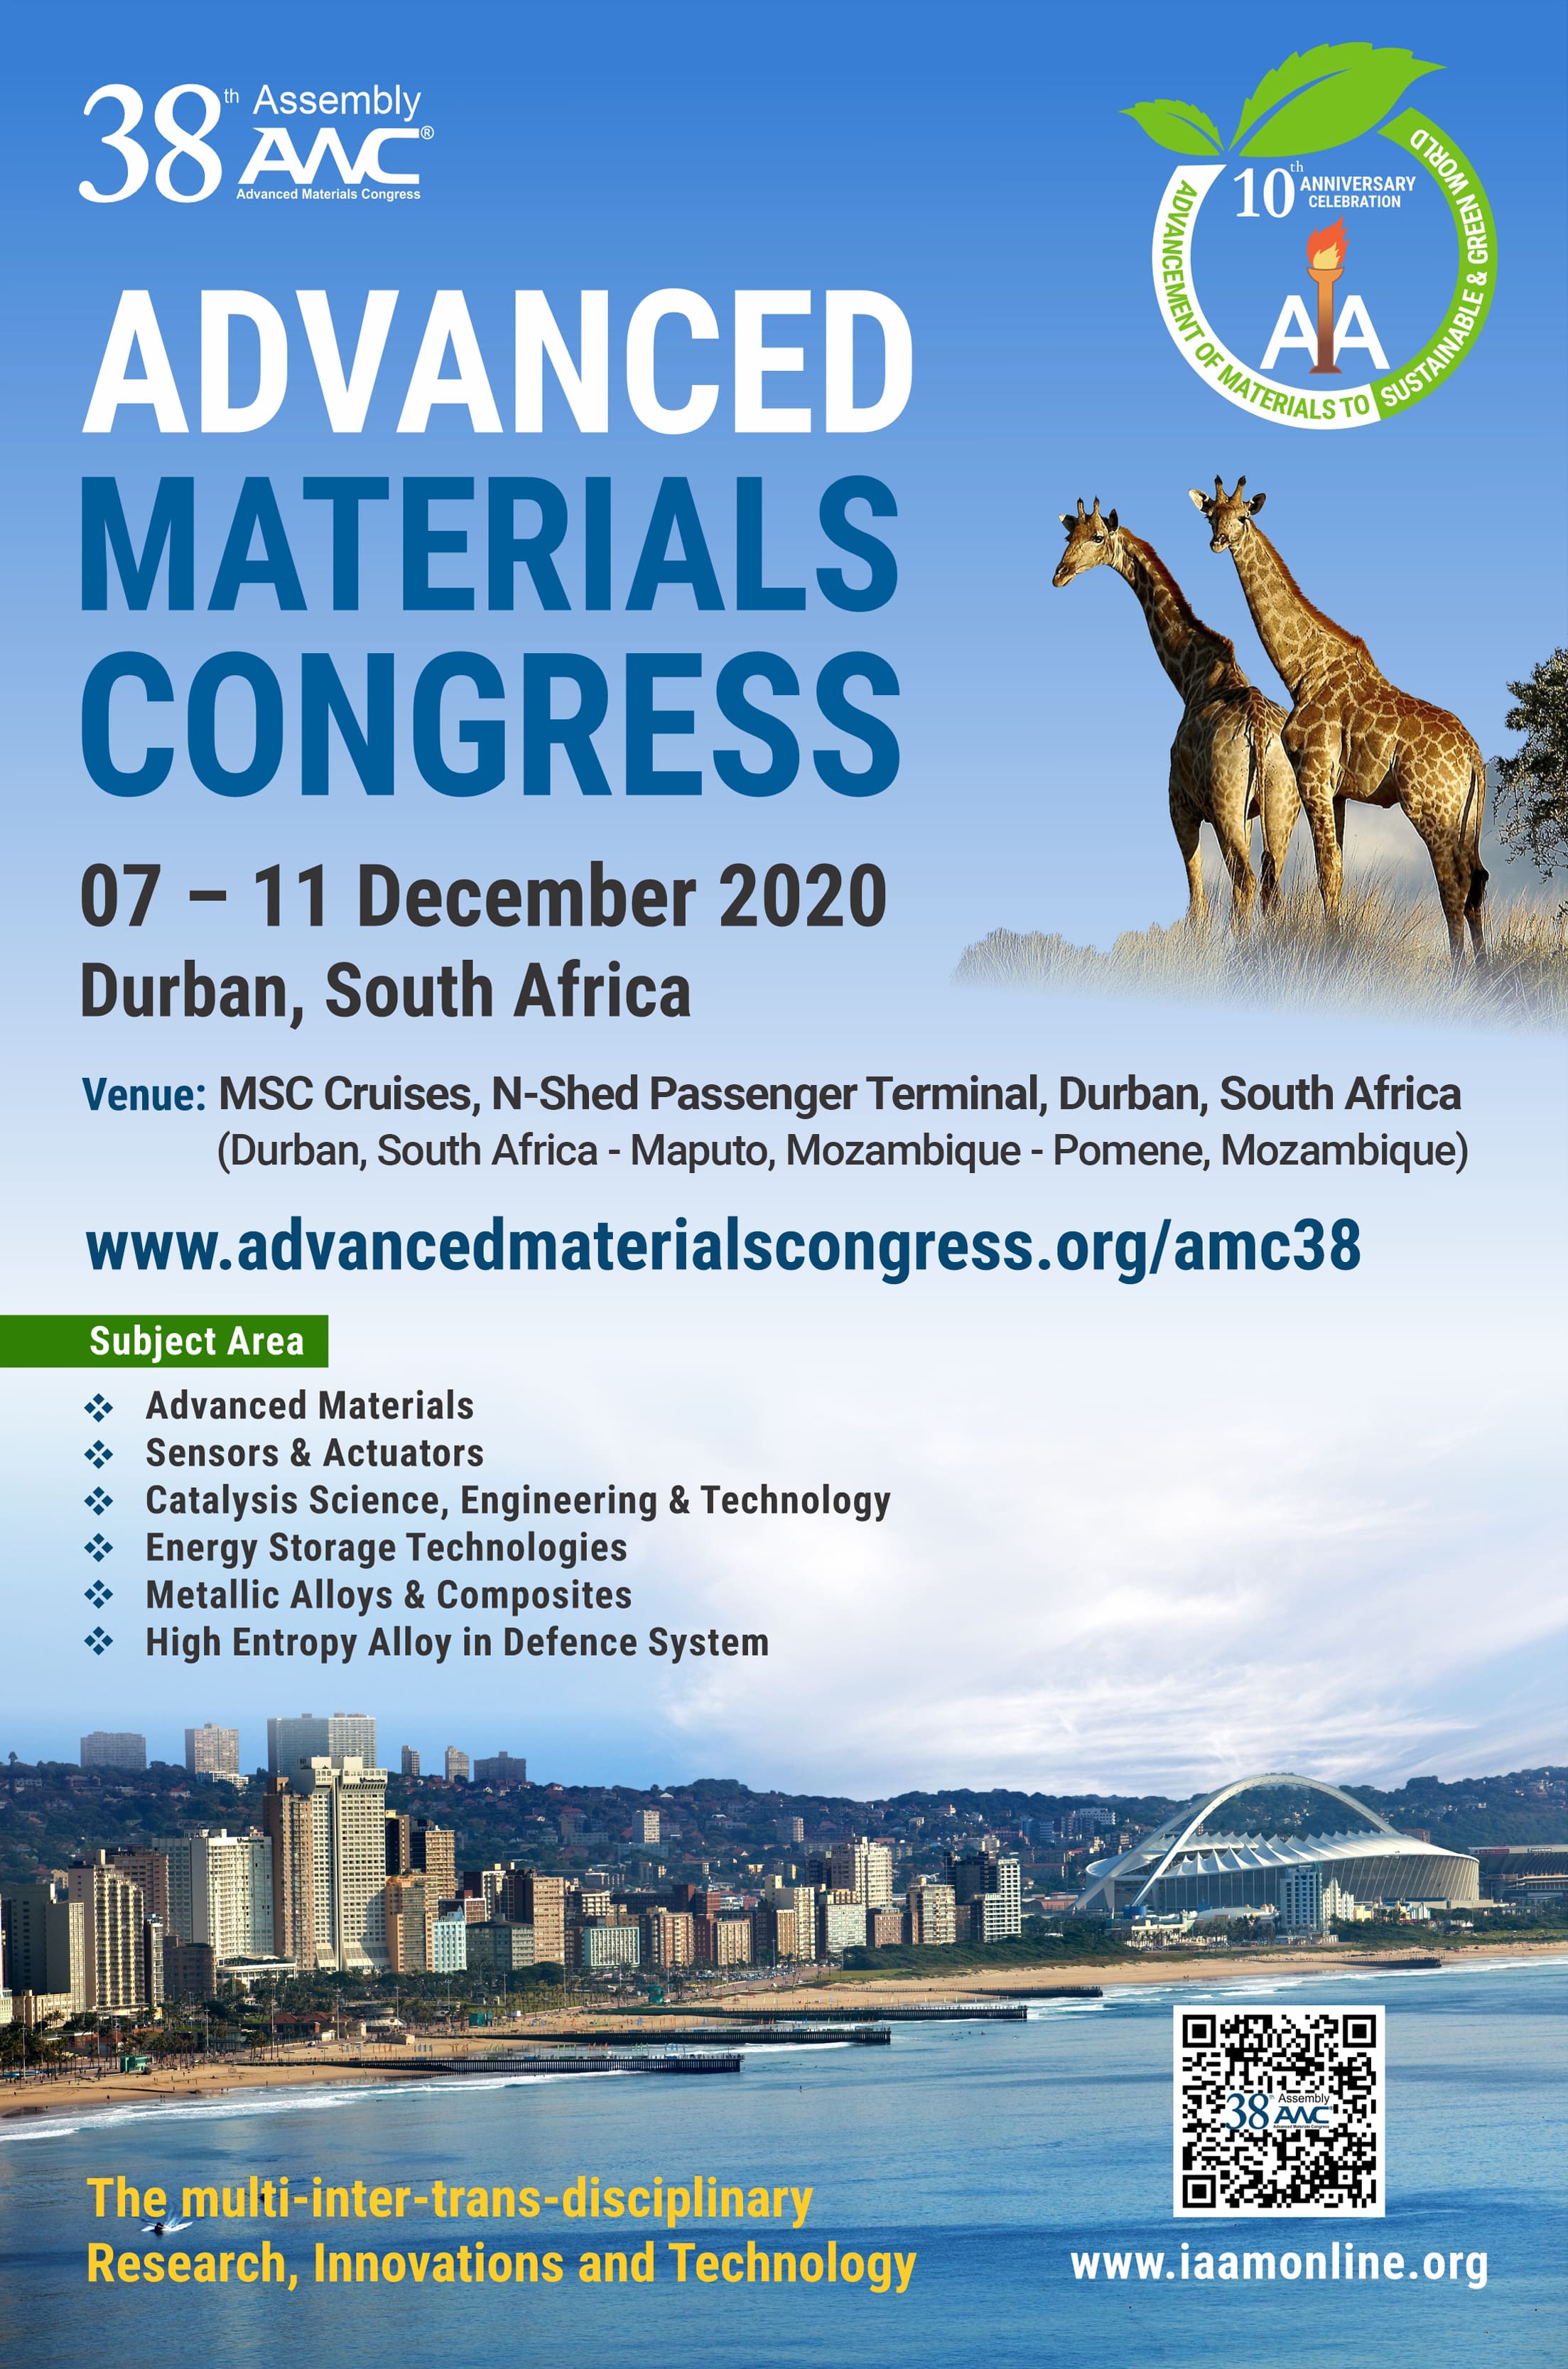 38th Assembly of Advanced Materials Congress 2020, Durban, South Africa